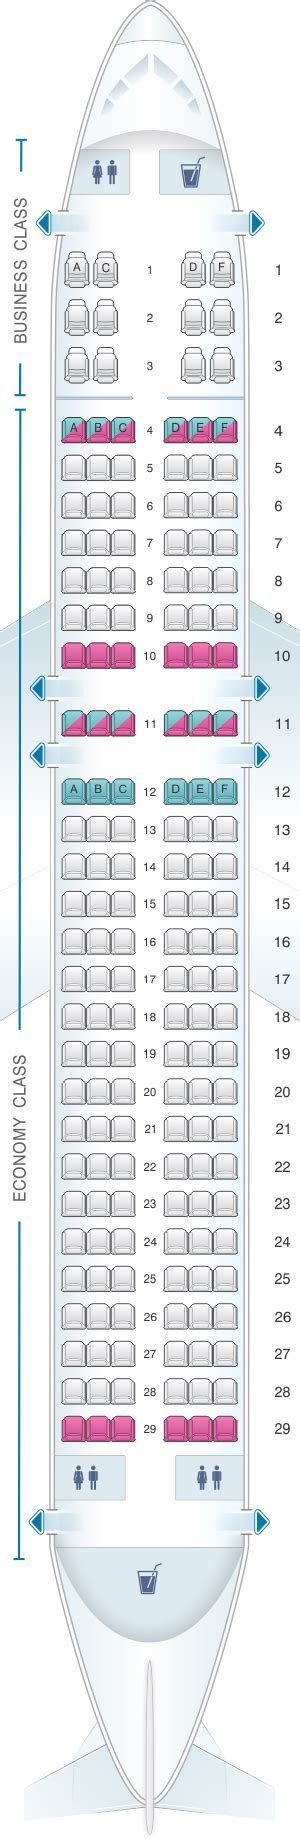 Seat Map Brussels Airlines Airbus A320